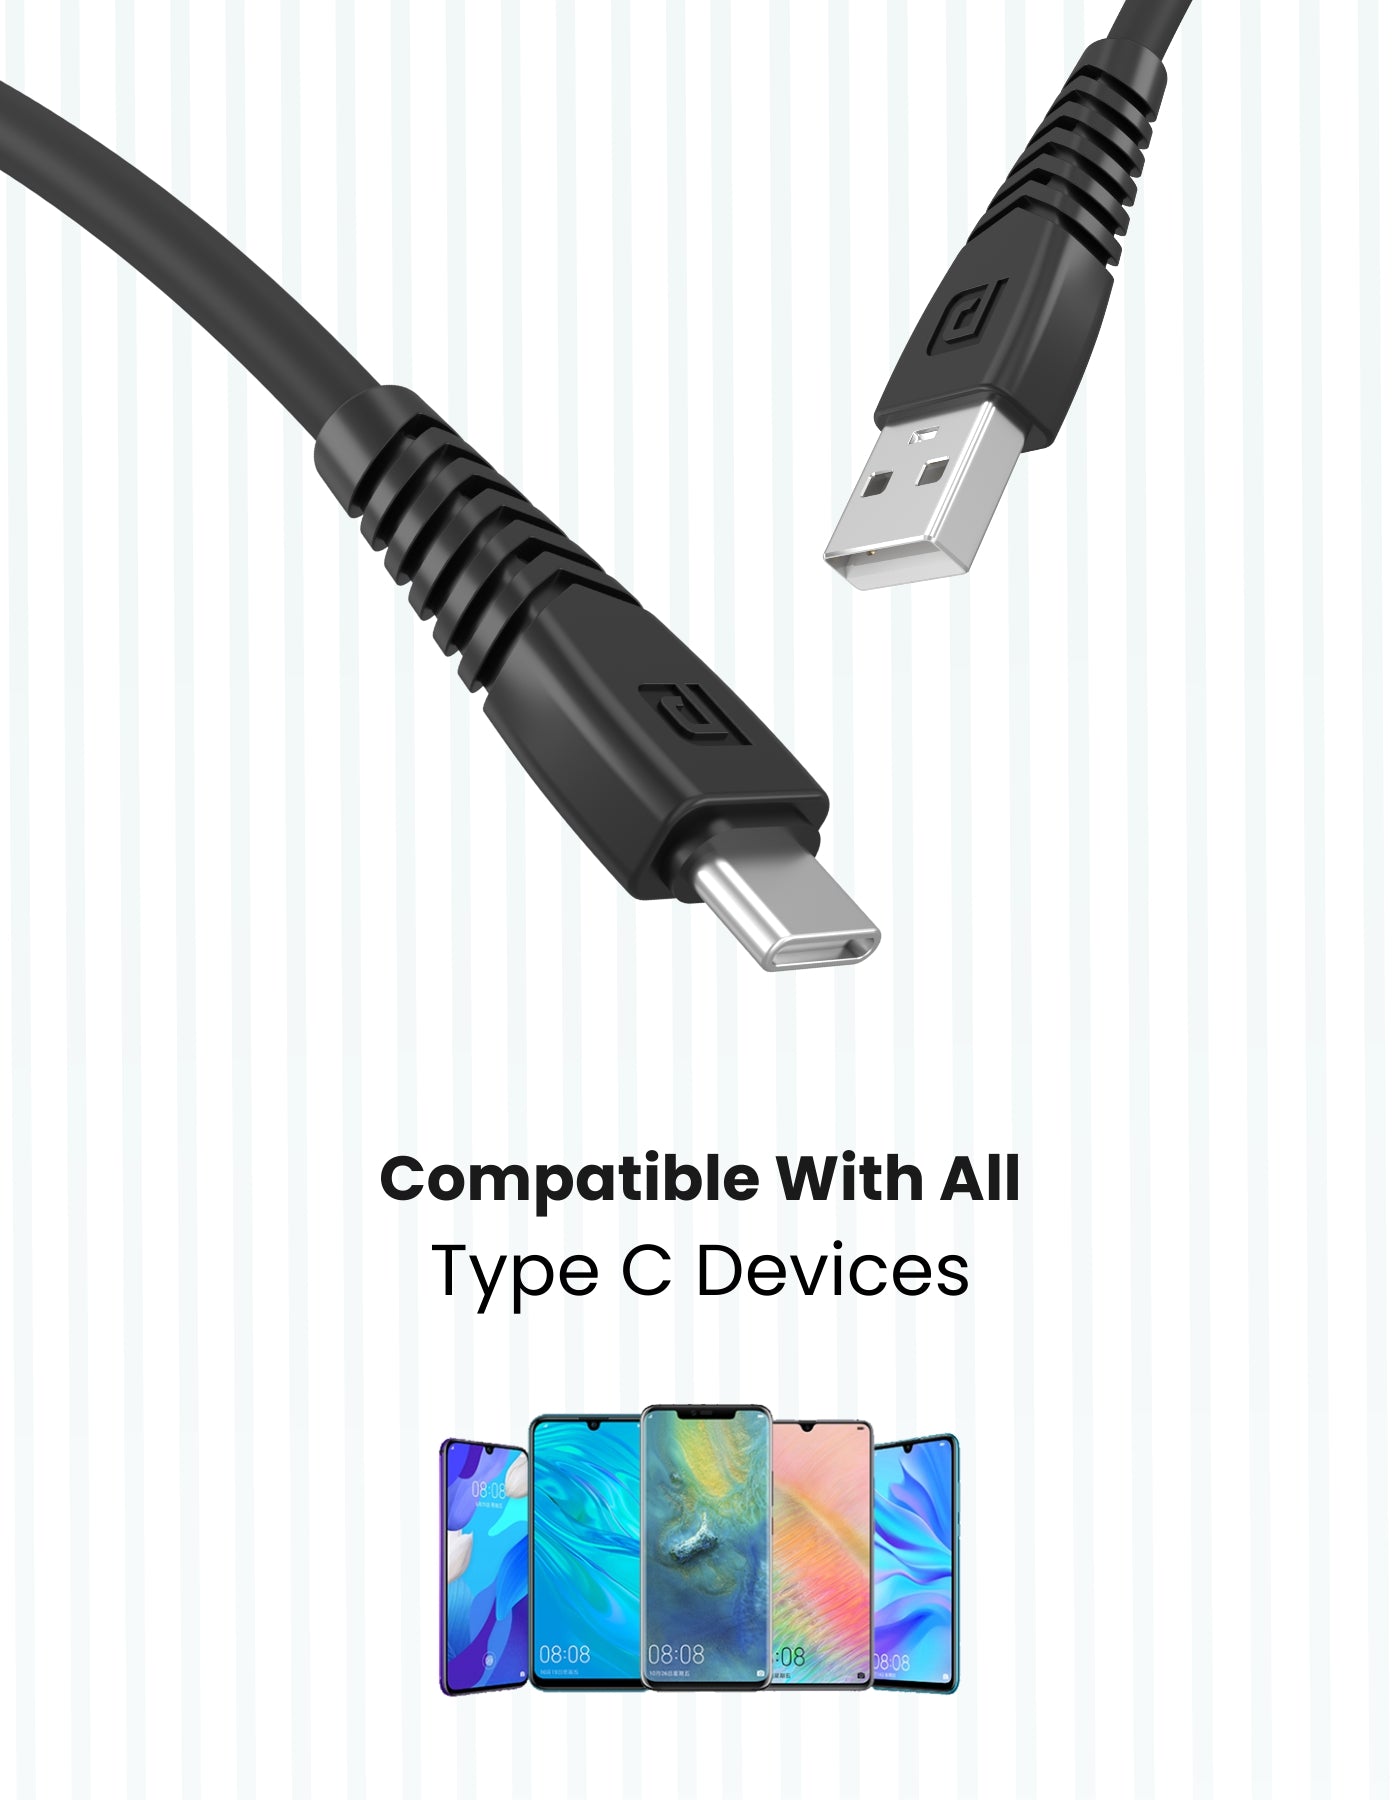 Portronics 2 Cables Combo of Konnect Core Type C Cable fast data transfer